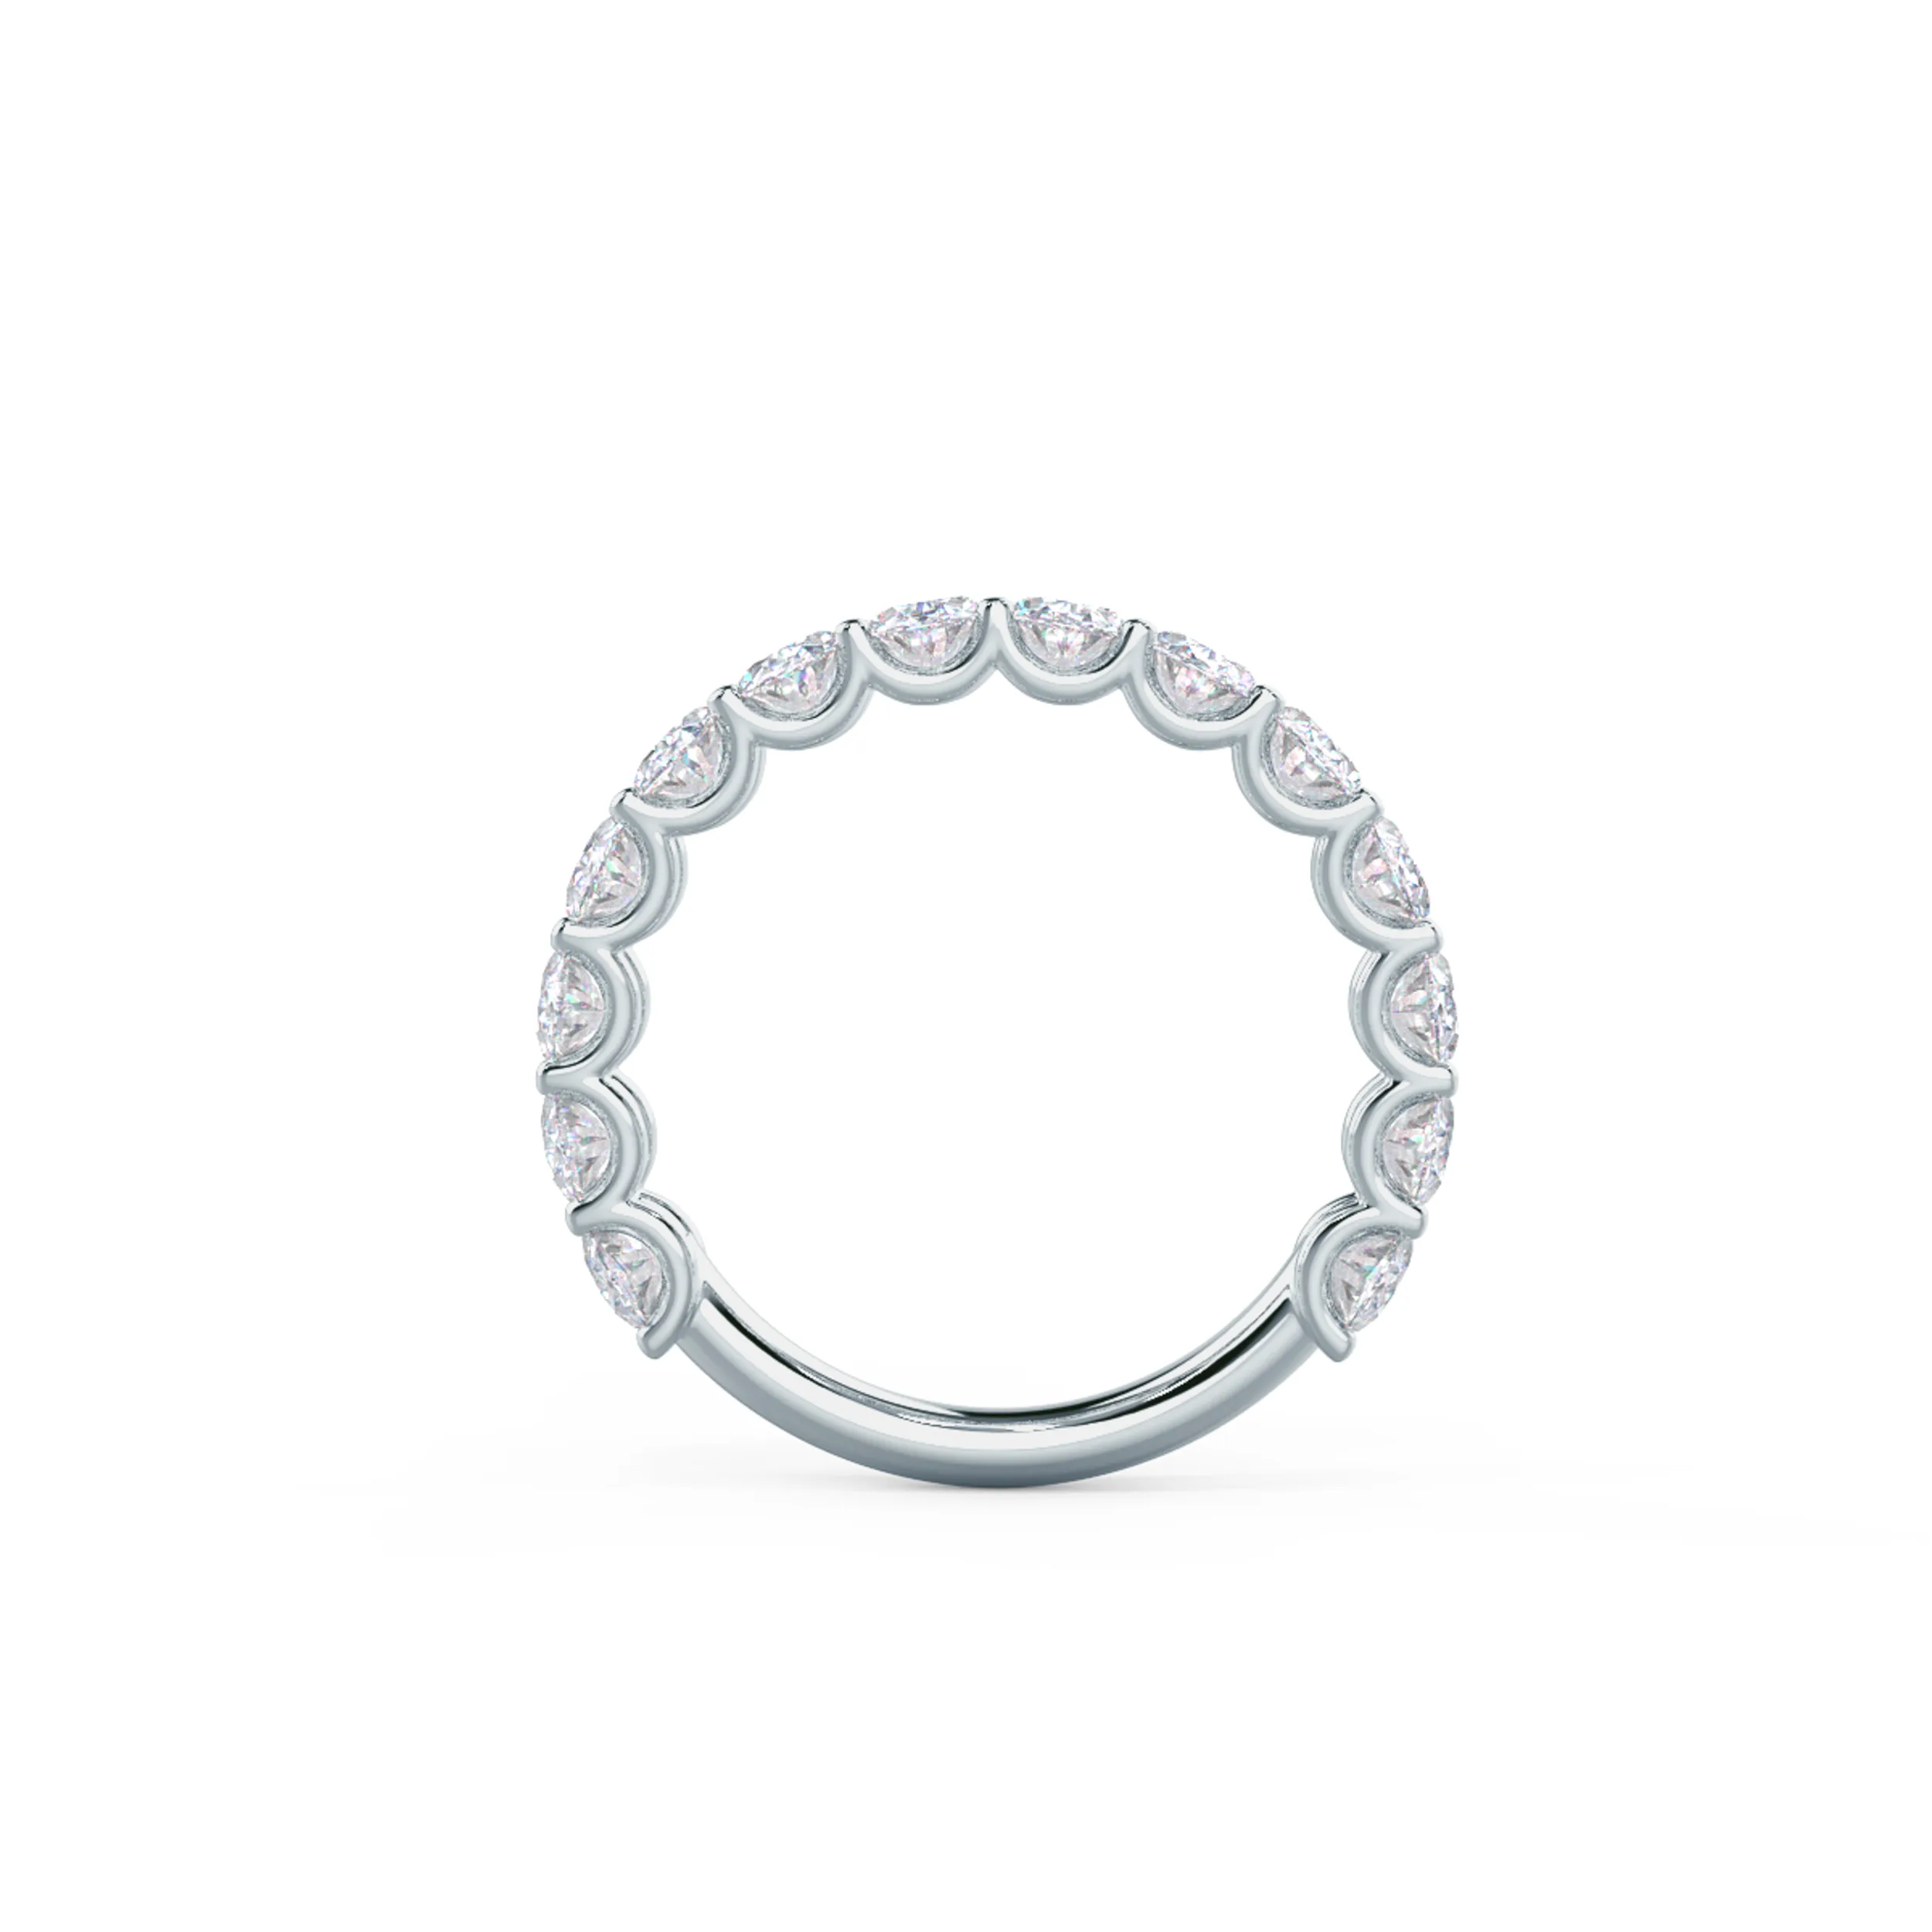 18k White Gold Oval French U Three Quarter Band featuring Hand Selected 2.85 ct Diamonds (Profile View)